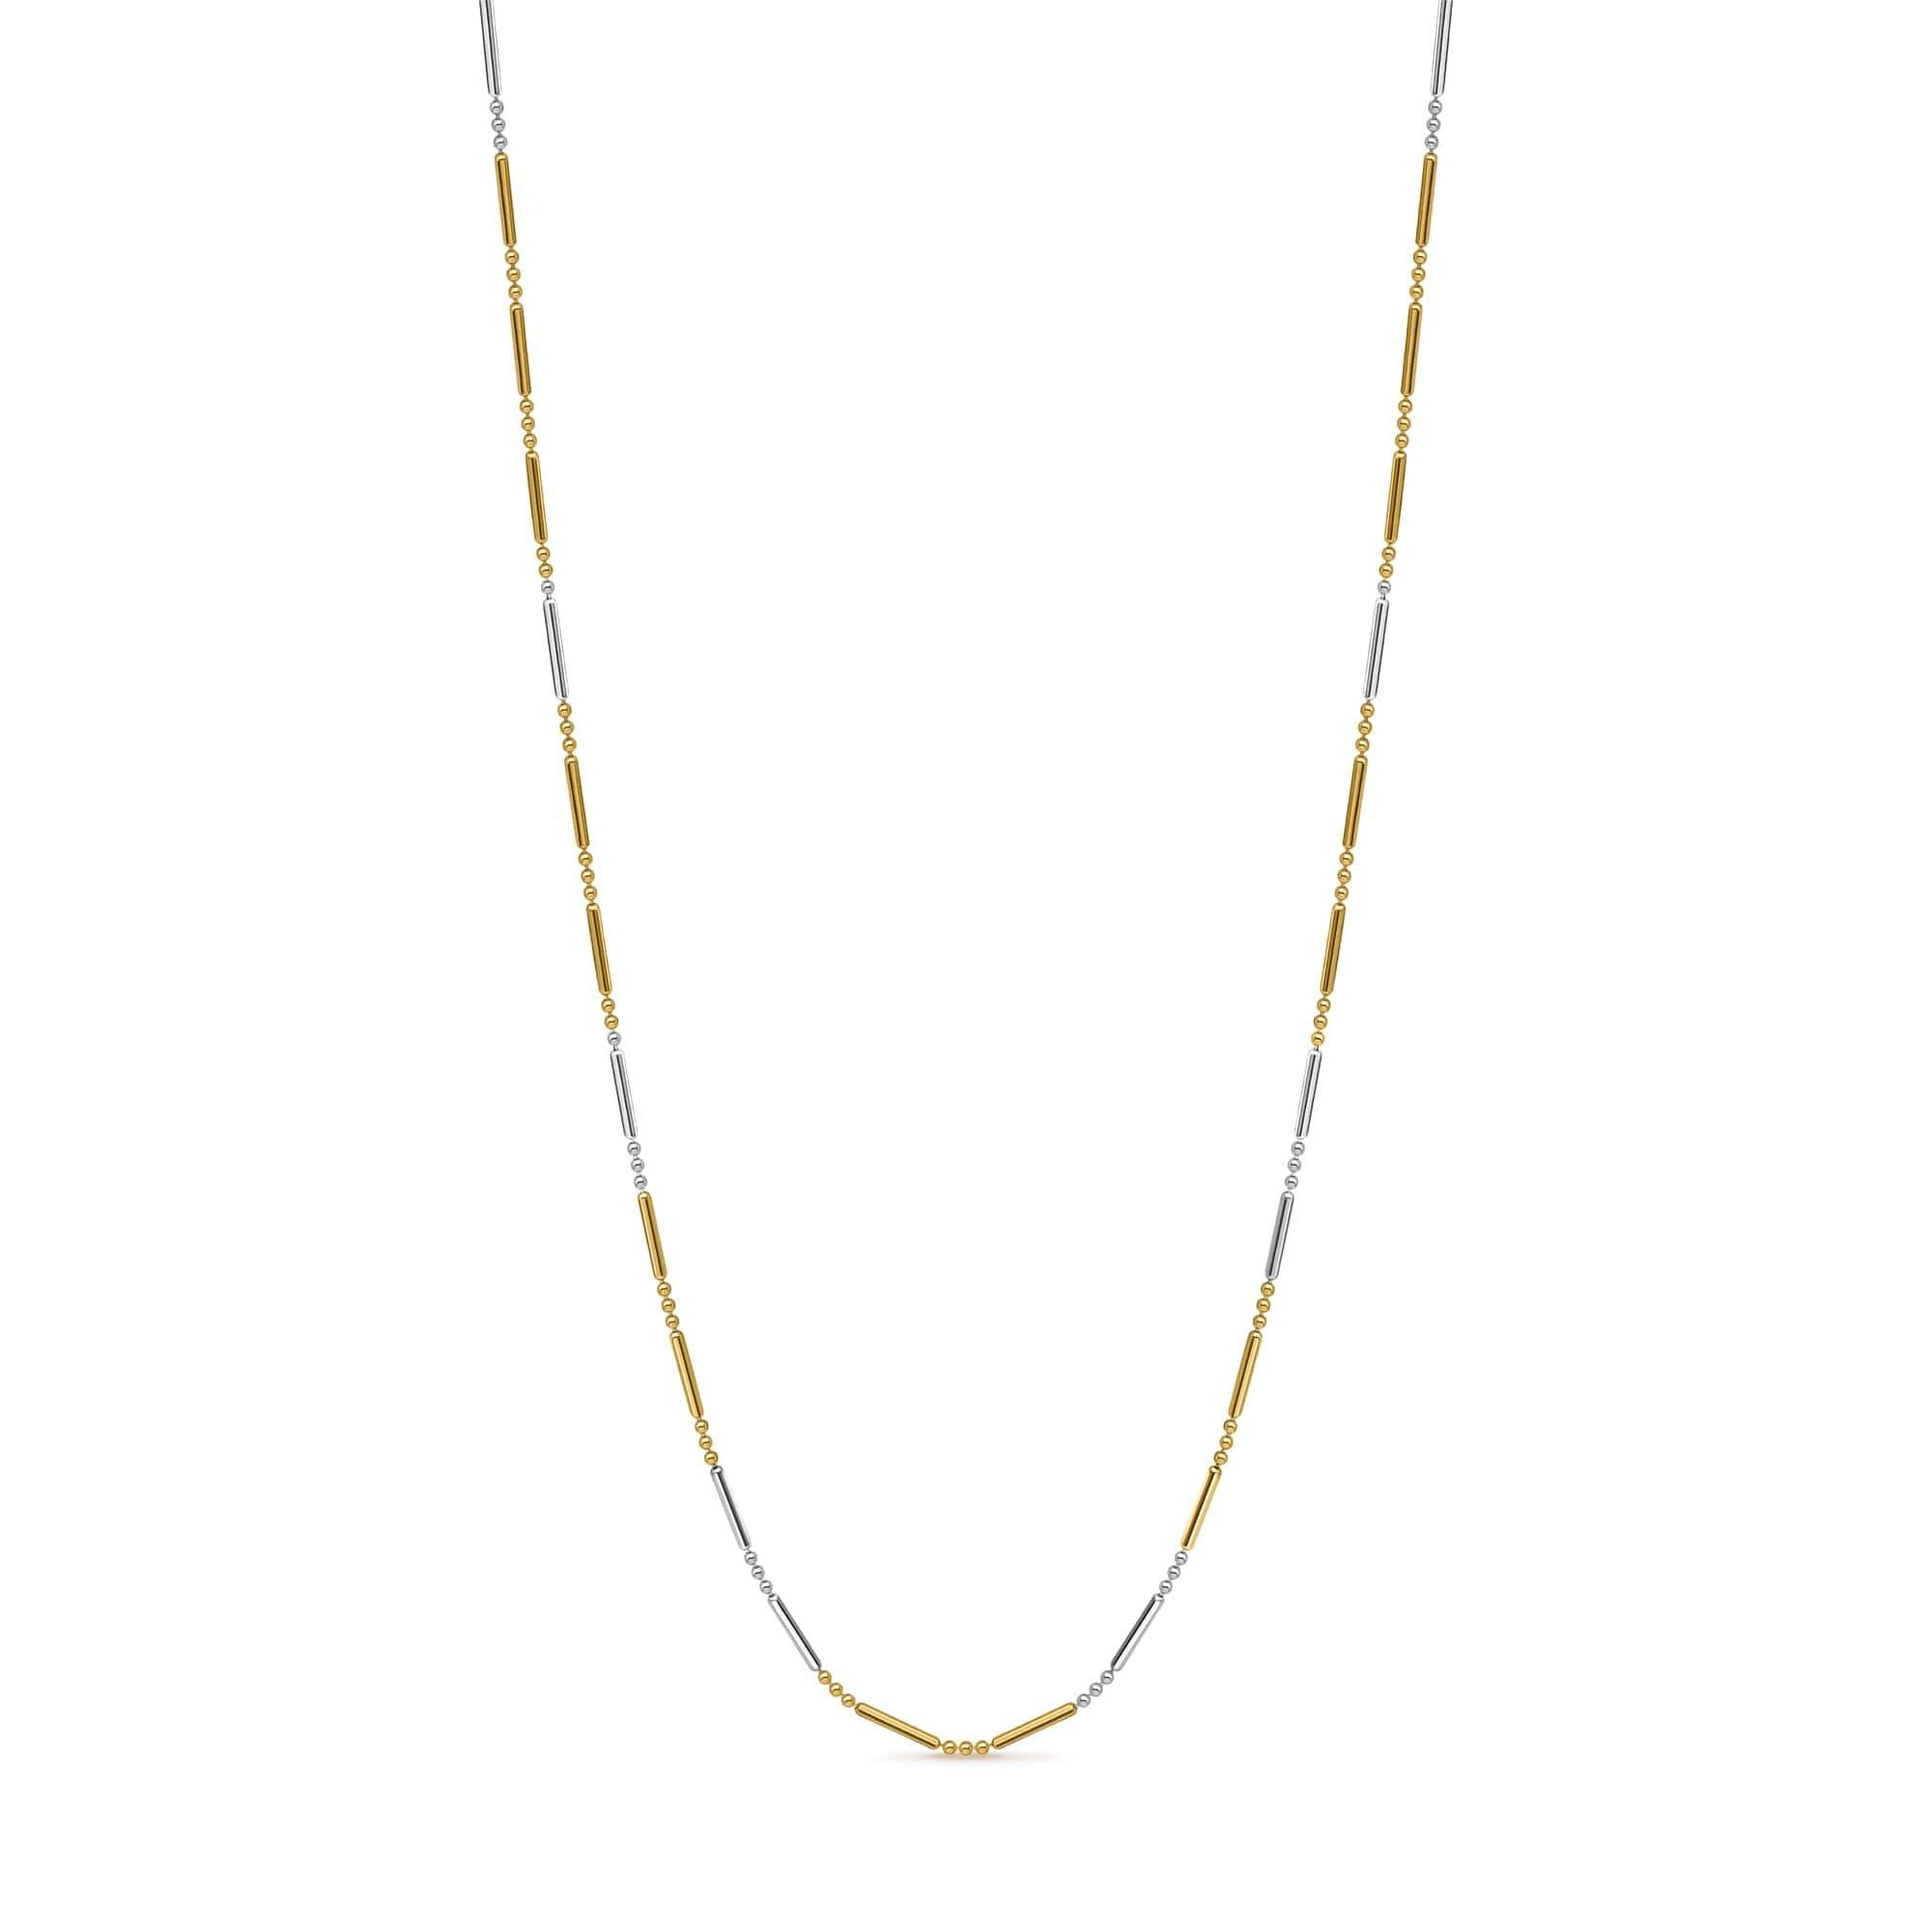 22K White & Yellow Gold Necklace